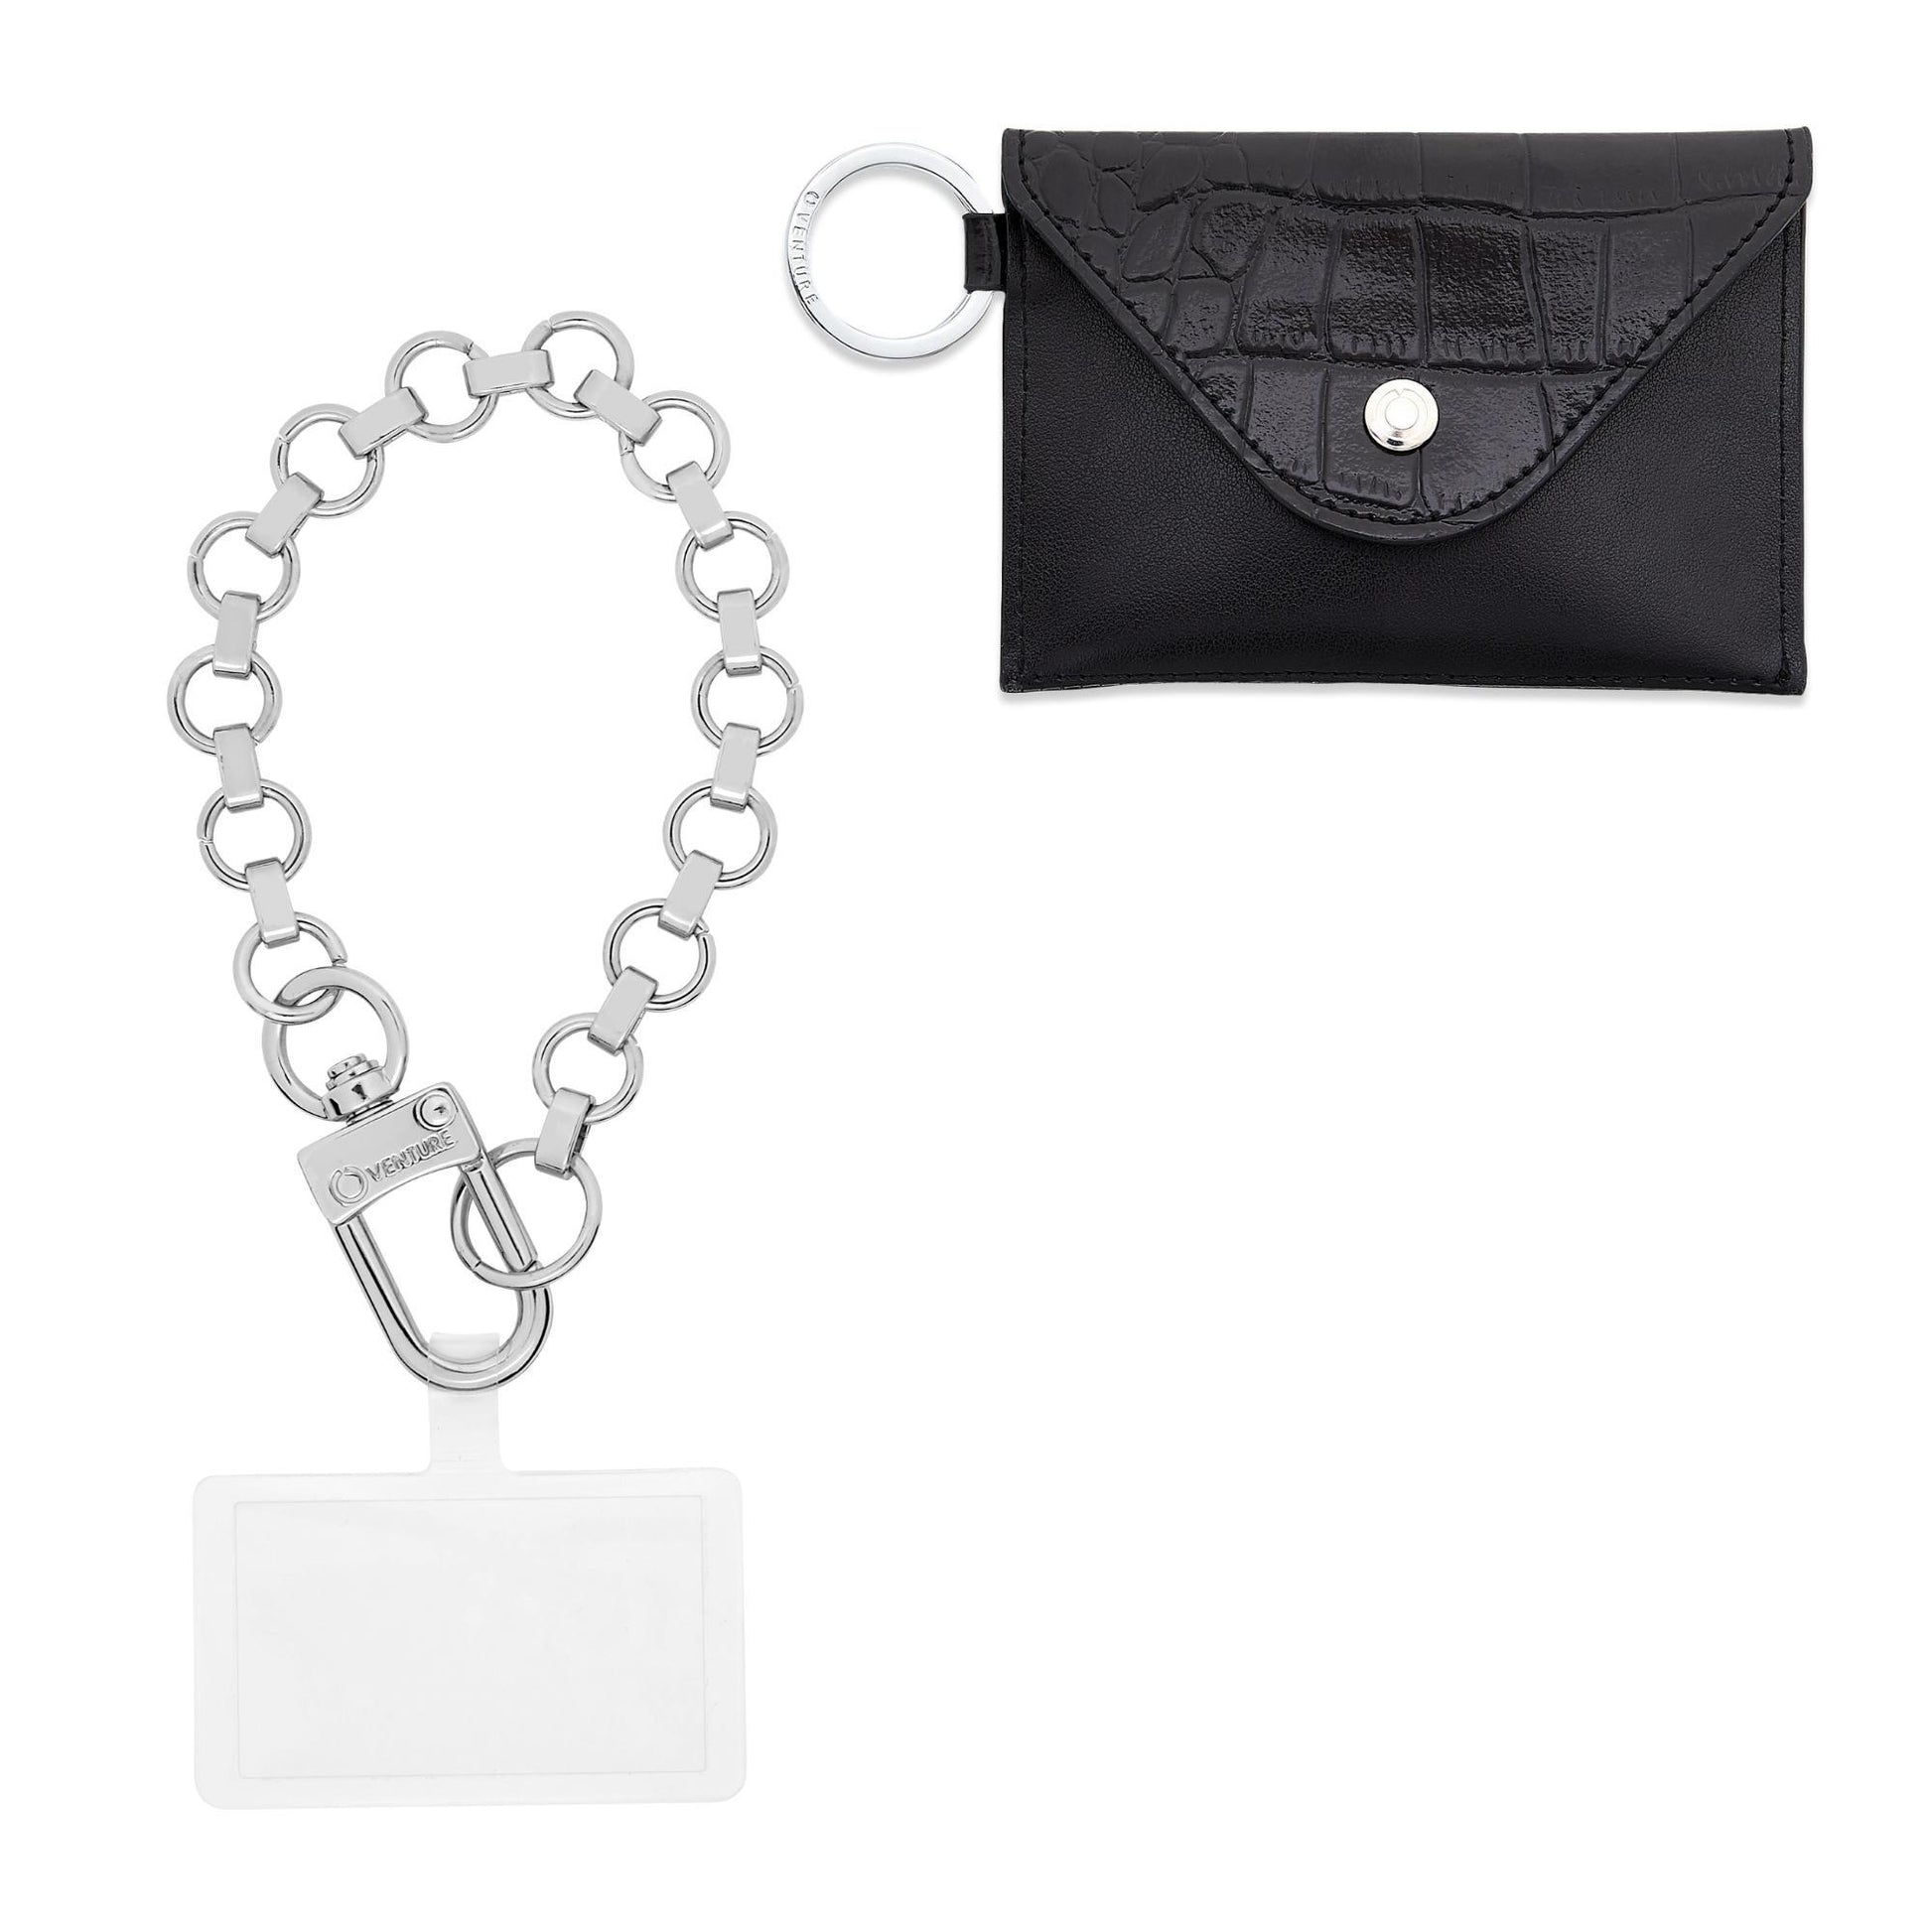 Oventure Siliver link wristlet with phone connector attached.  Mini envelope wallet in black croc included.